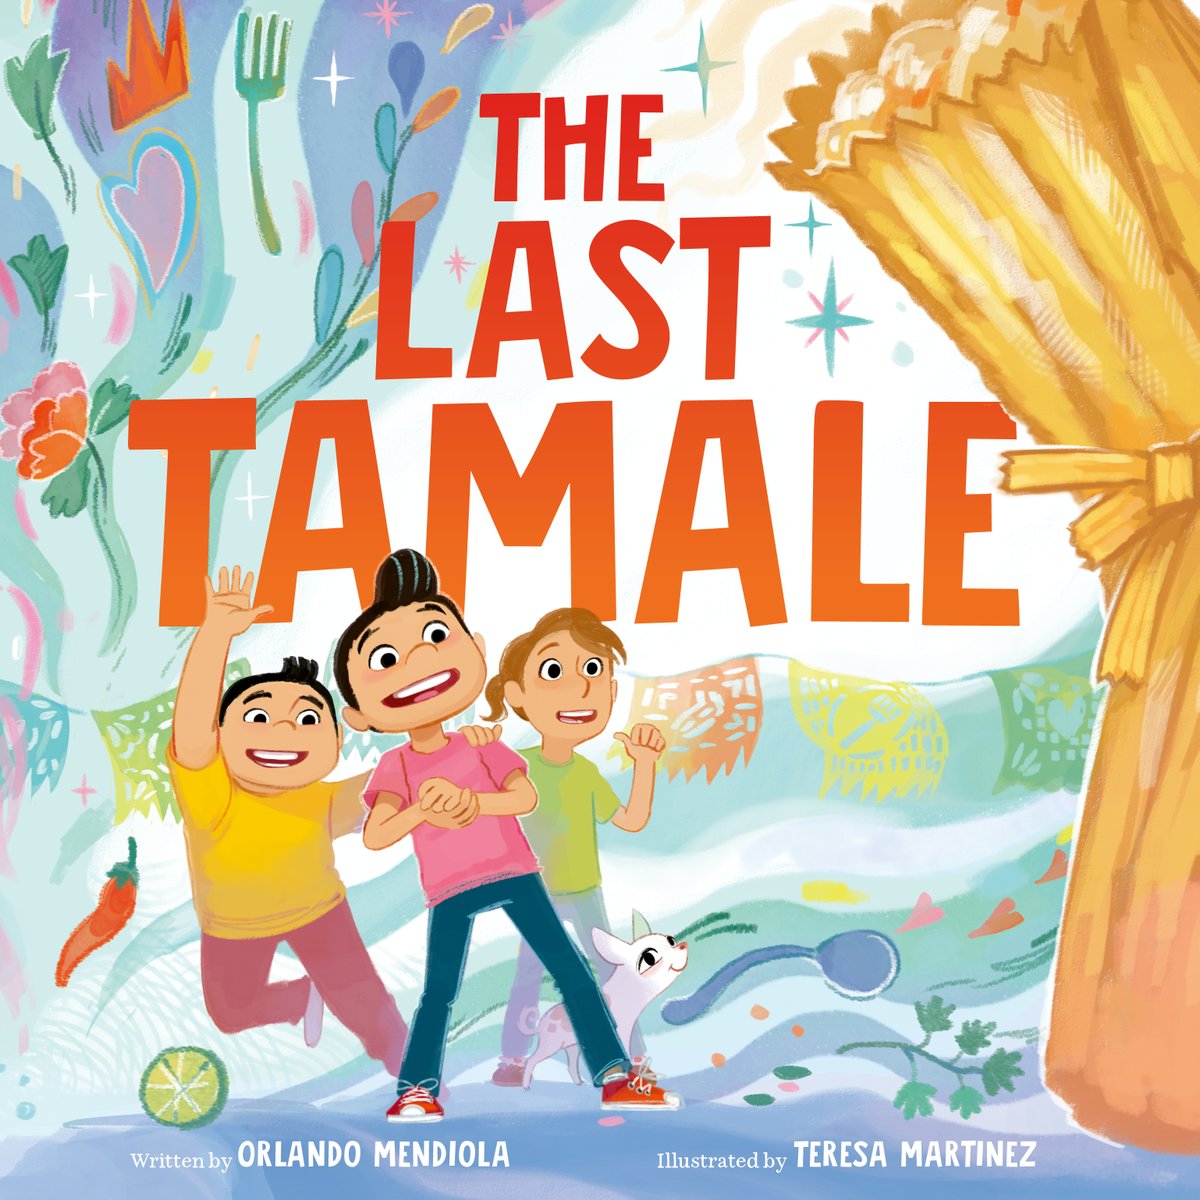 SO EXCITED to reveal the cover of my debut children’s book, The Last Tamale, out September 3! Illustrated by the AMAZING Teresa Martinez 🥳🫔🙌🏼